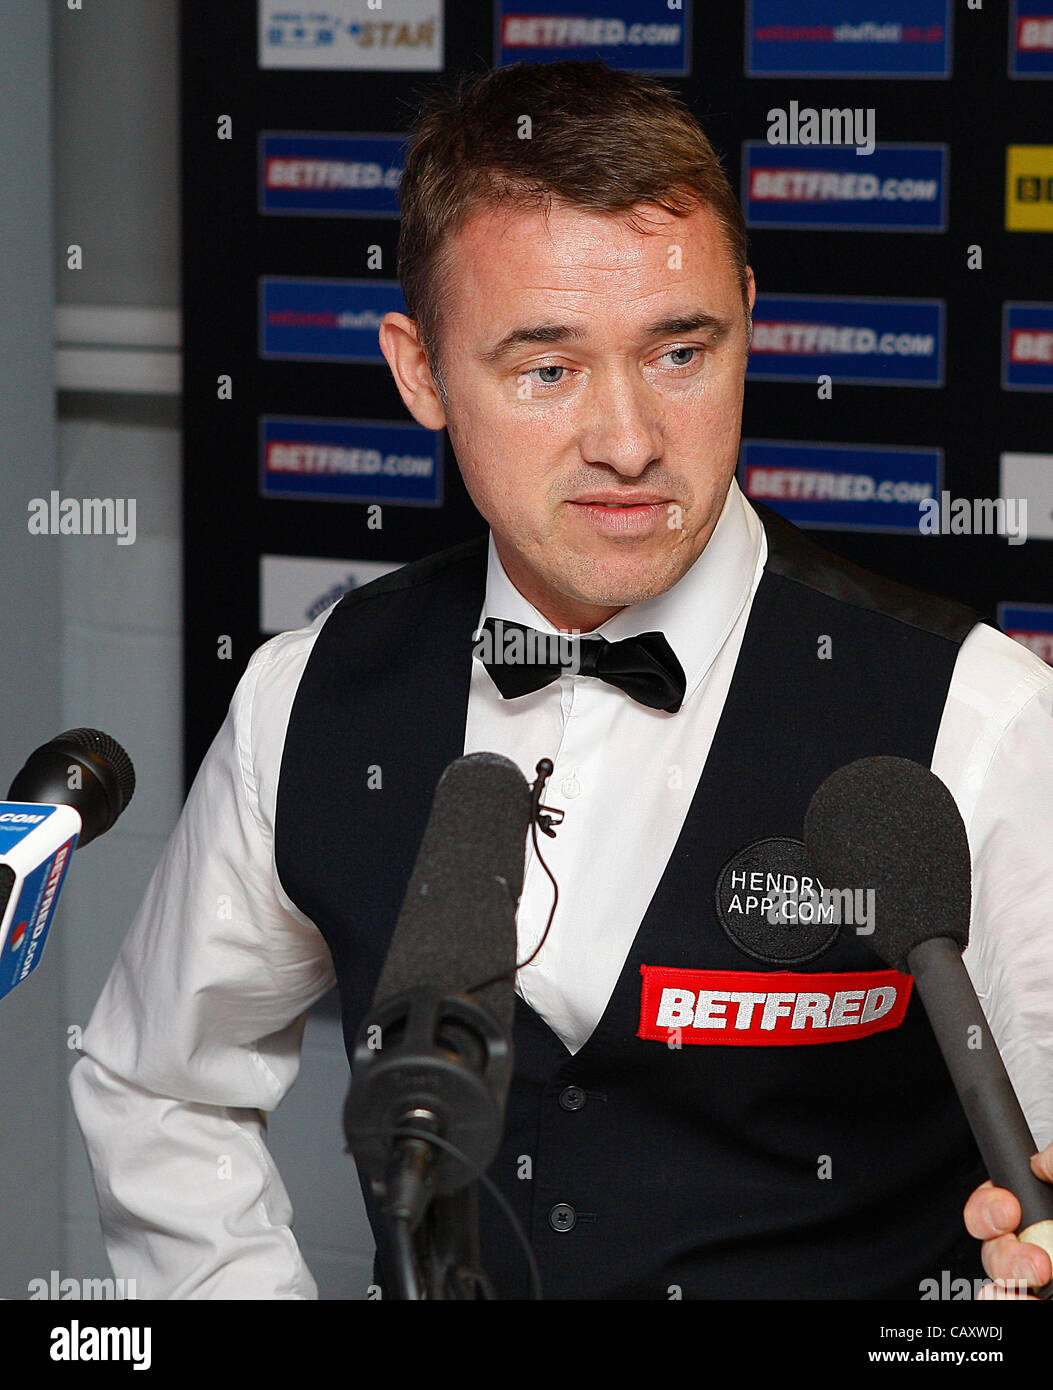 May 1, 2012 - Sheffield, England - 01.05.2012 - Stephen Hendry announced he is to retire from tournament snooker after being knocked out by Stephen Maguire at the World Championships at the quarter-finals by 13 frames to 2. (Credit Image: © Michael Cullen/ZUMAPRESS.com) Stock Photo